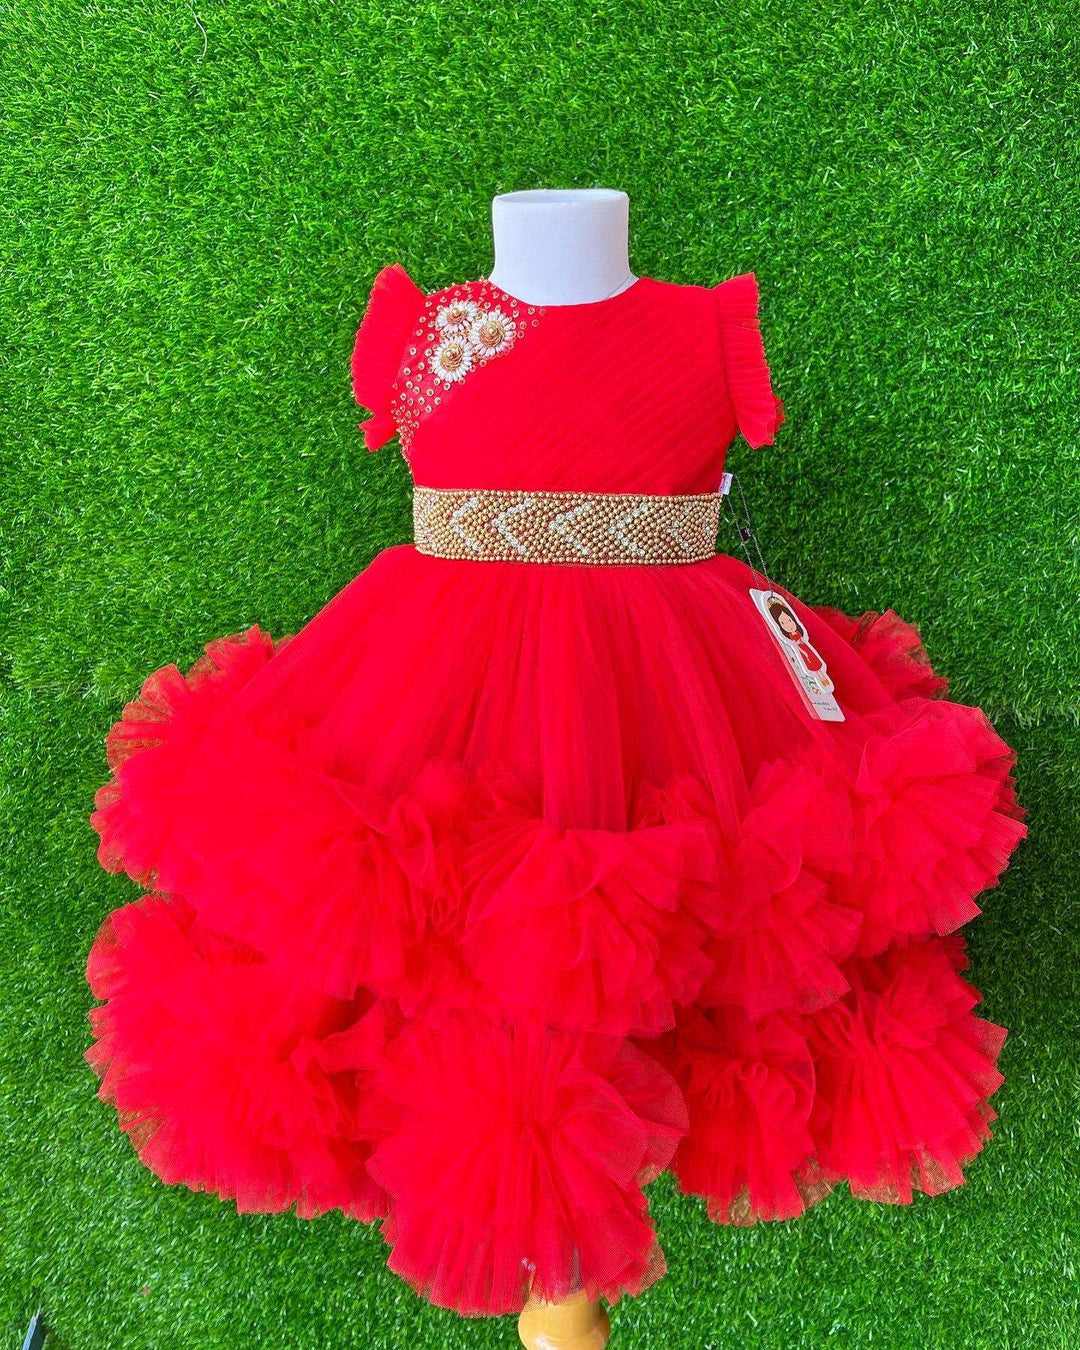 Red Layered Pleated Heavy Ruffled Hand embroidery Birthday Frock

Material: Bright red nylon mono net with layered and ruffles on the end portion. Yoke portion is designed with pleated pattern and a handwork in the centre portion